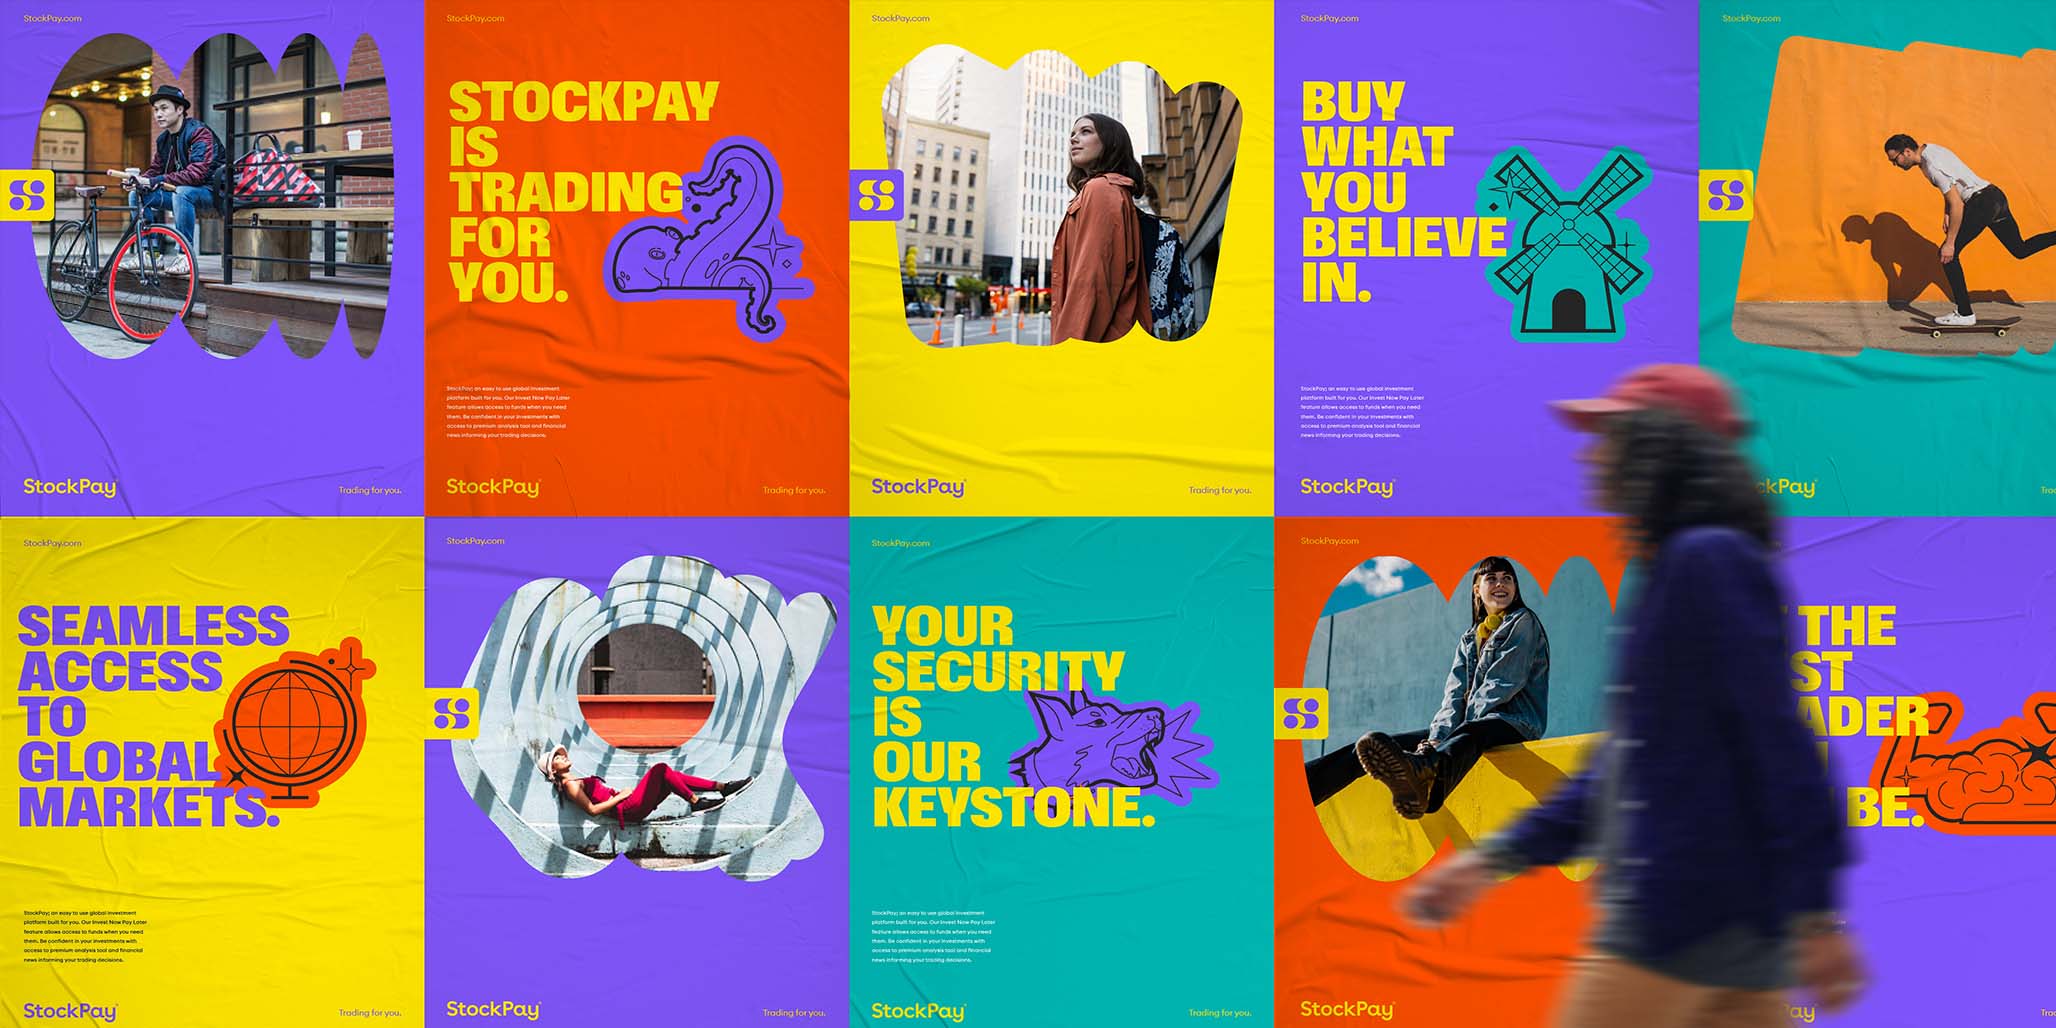 Australian branding agency, Percept, was engaged by StockPay to deliver brand positioning and branding, image C